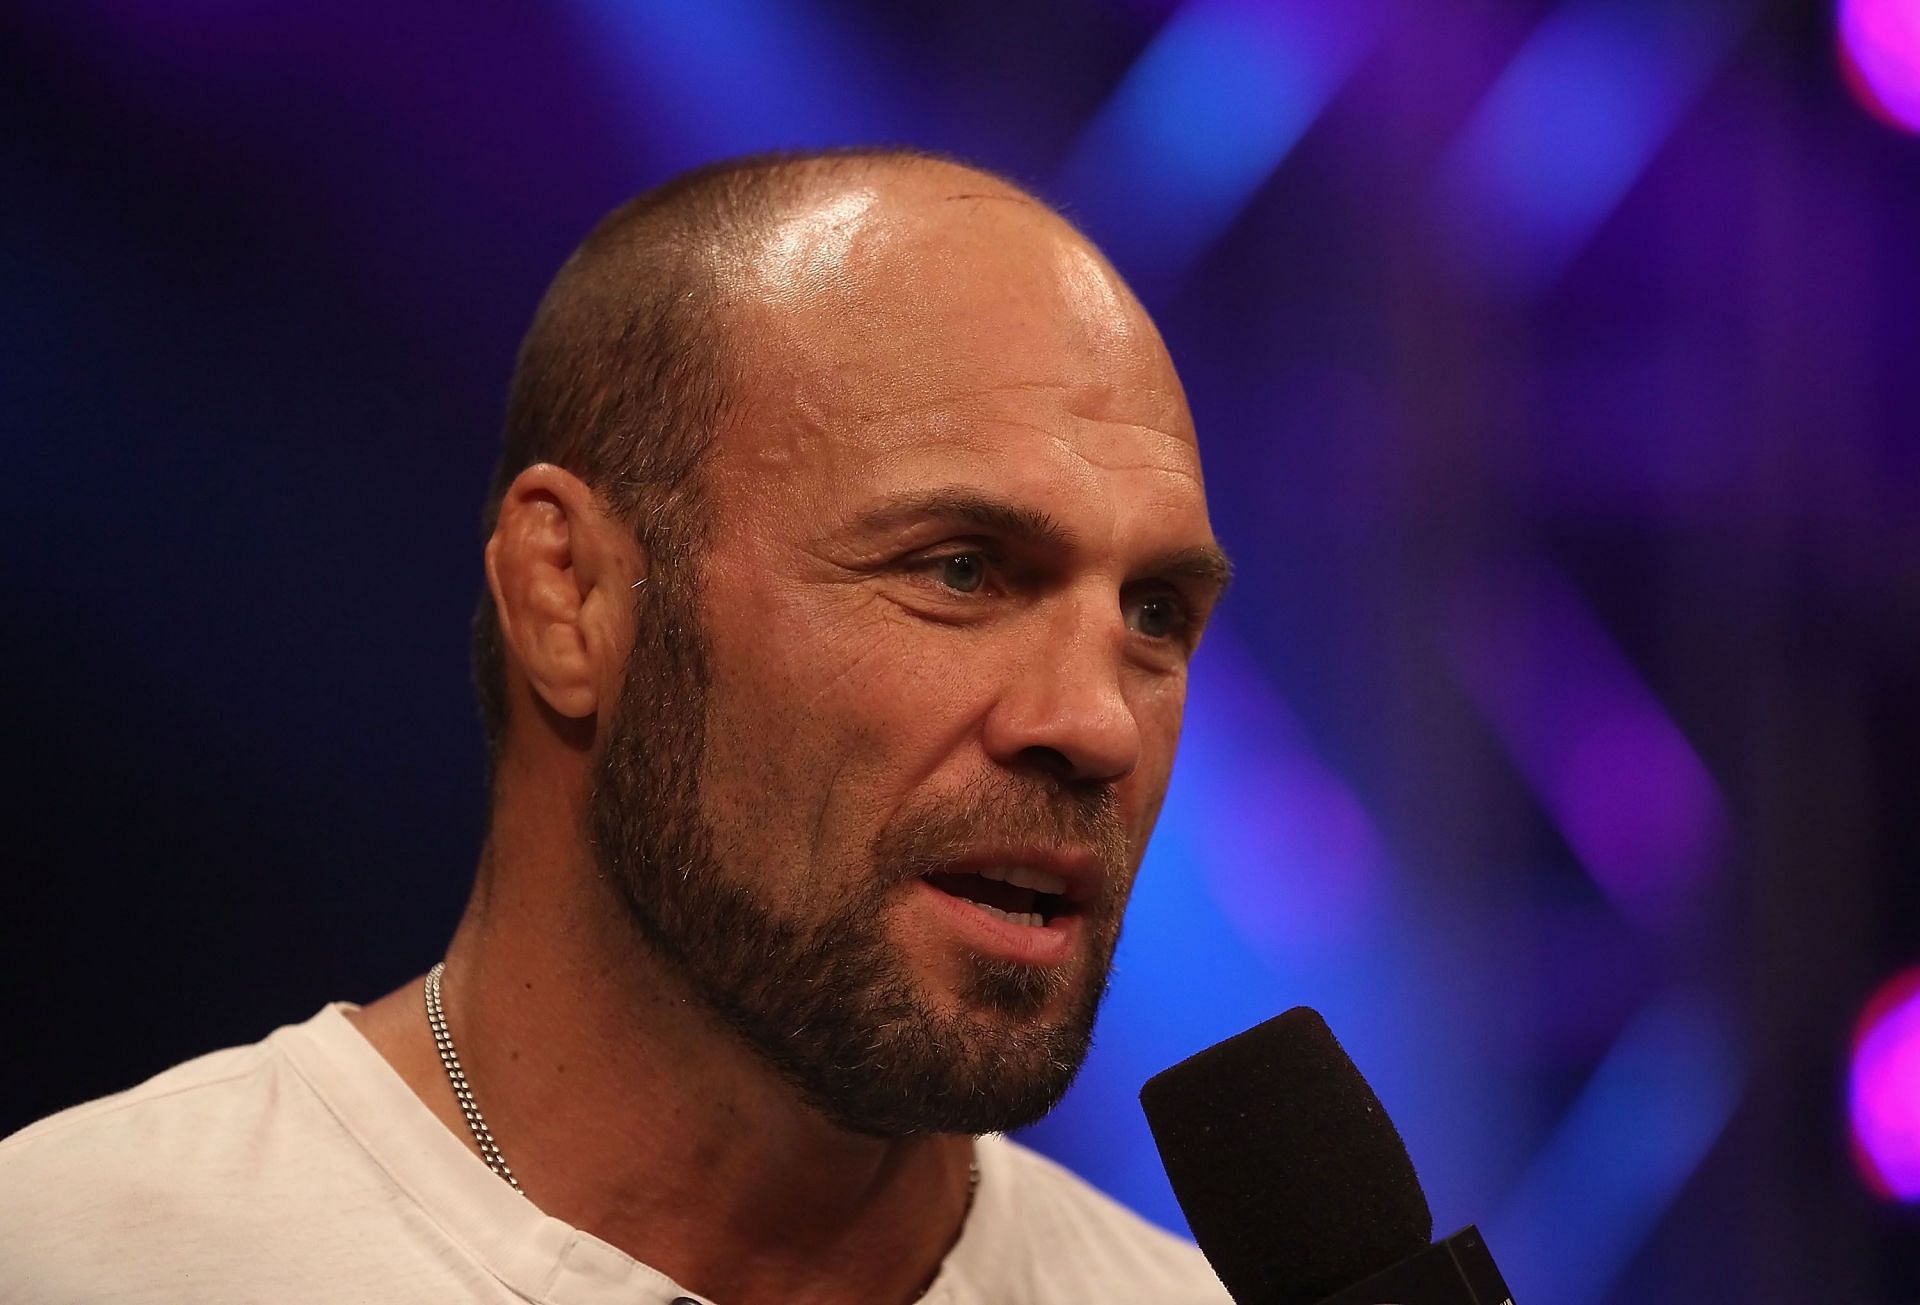 Randy Couture won the UFC heavyweight title at the age of 43